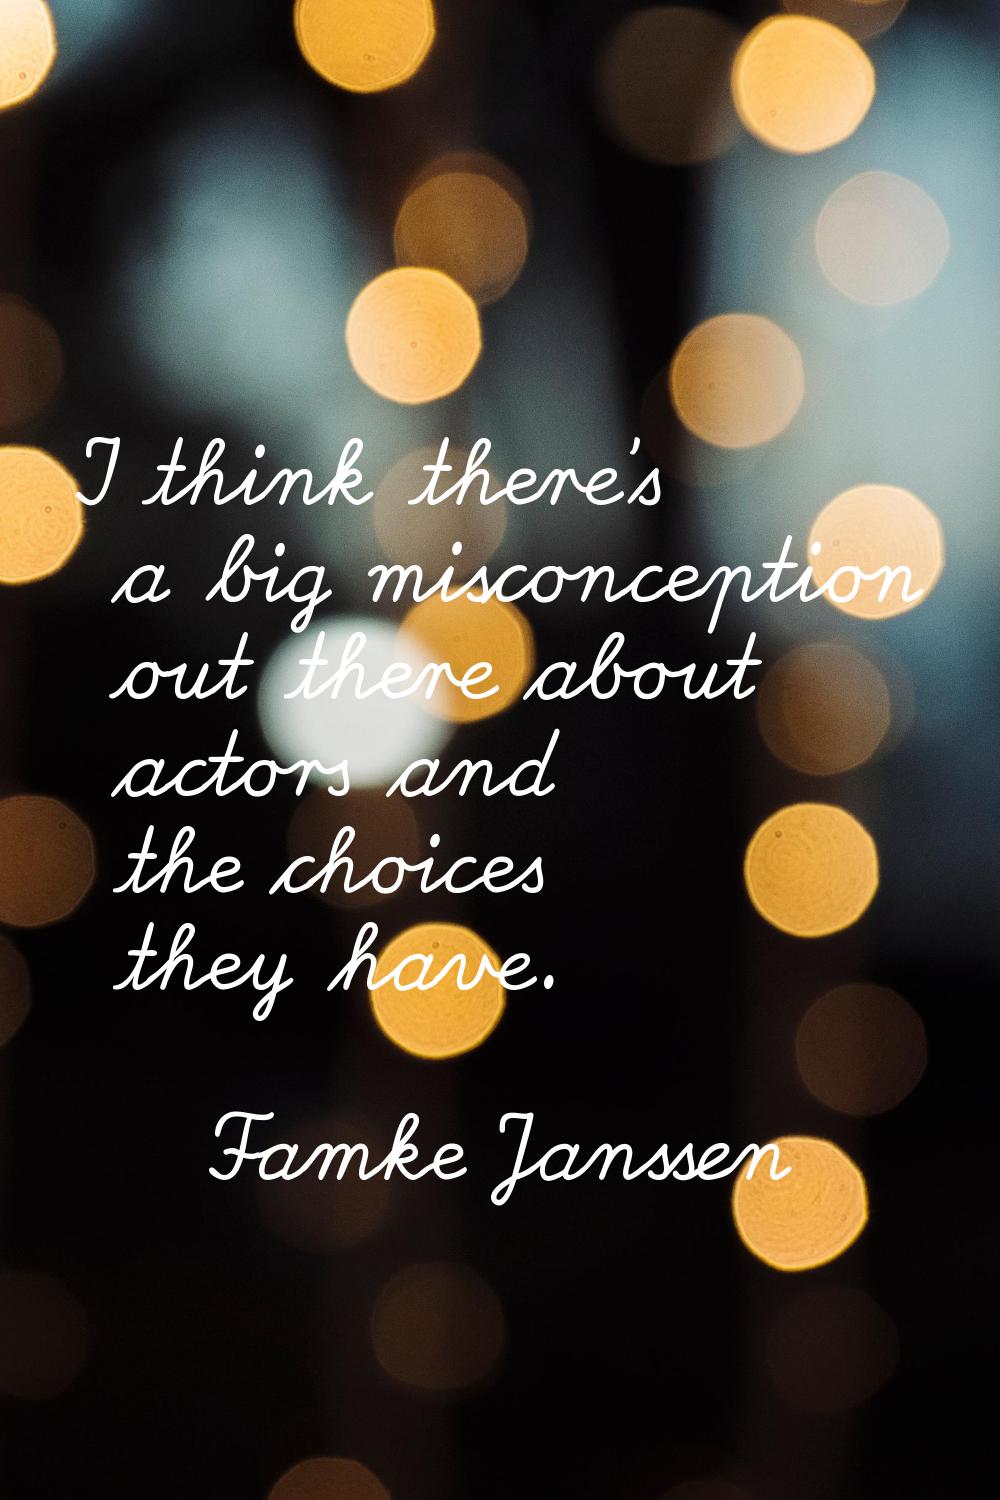 I think there's a big misconception out there about actors and the choices they have.